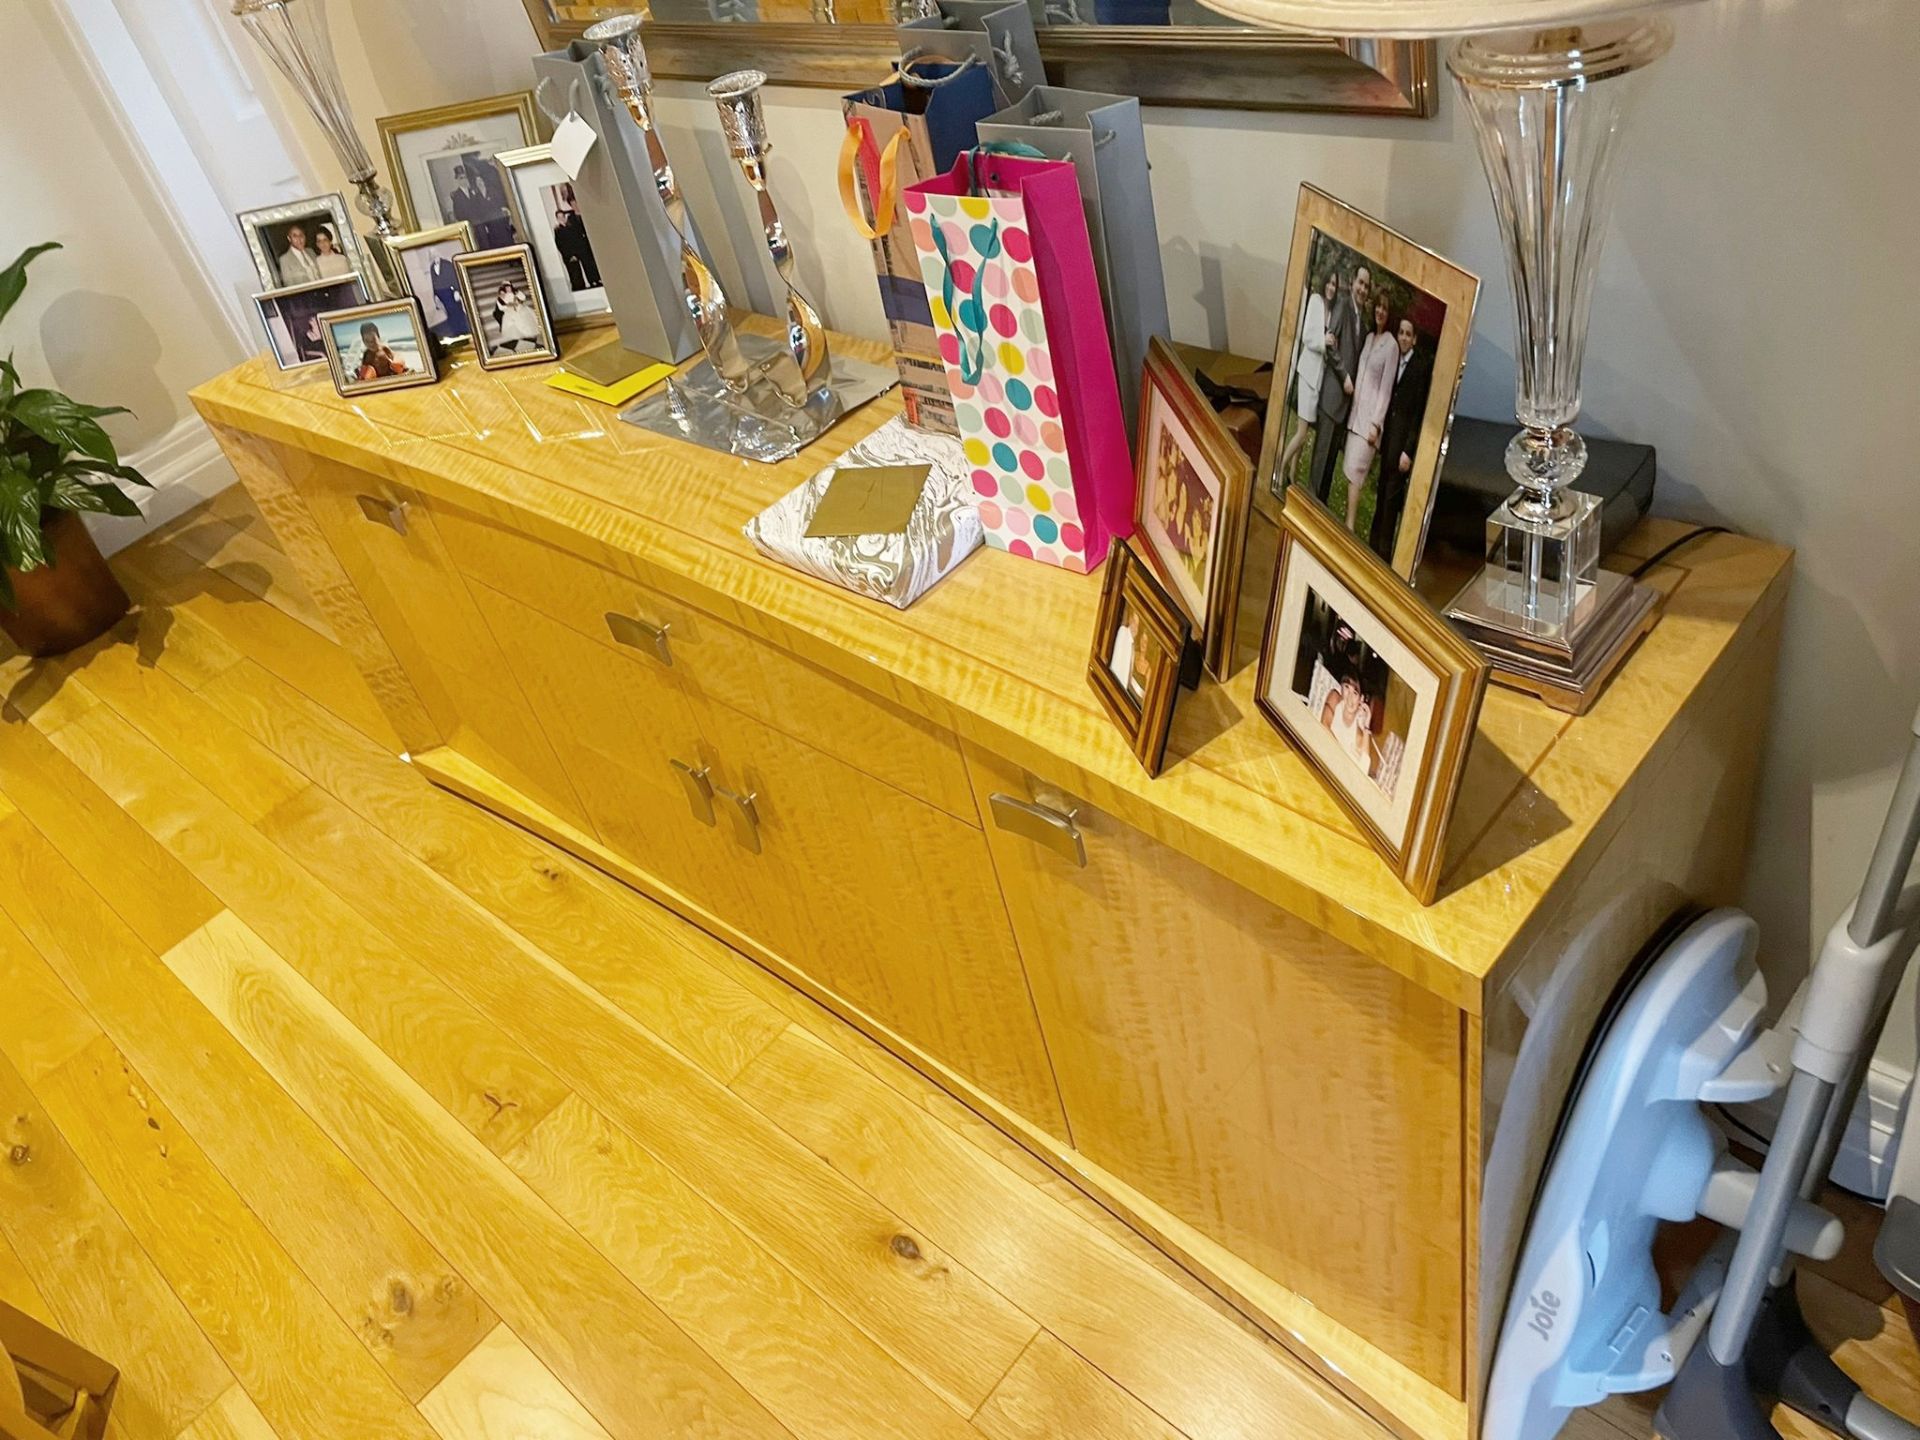 1 x Stylish 2-Metre 4-Door, ! x Drawer Wooden Sideboard With Curved Aesthetic And Gloss Finish -